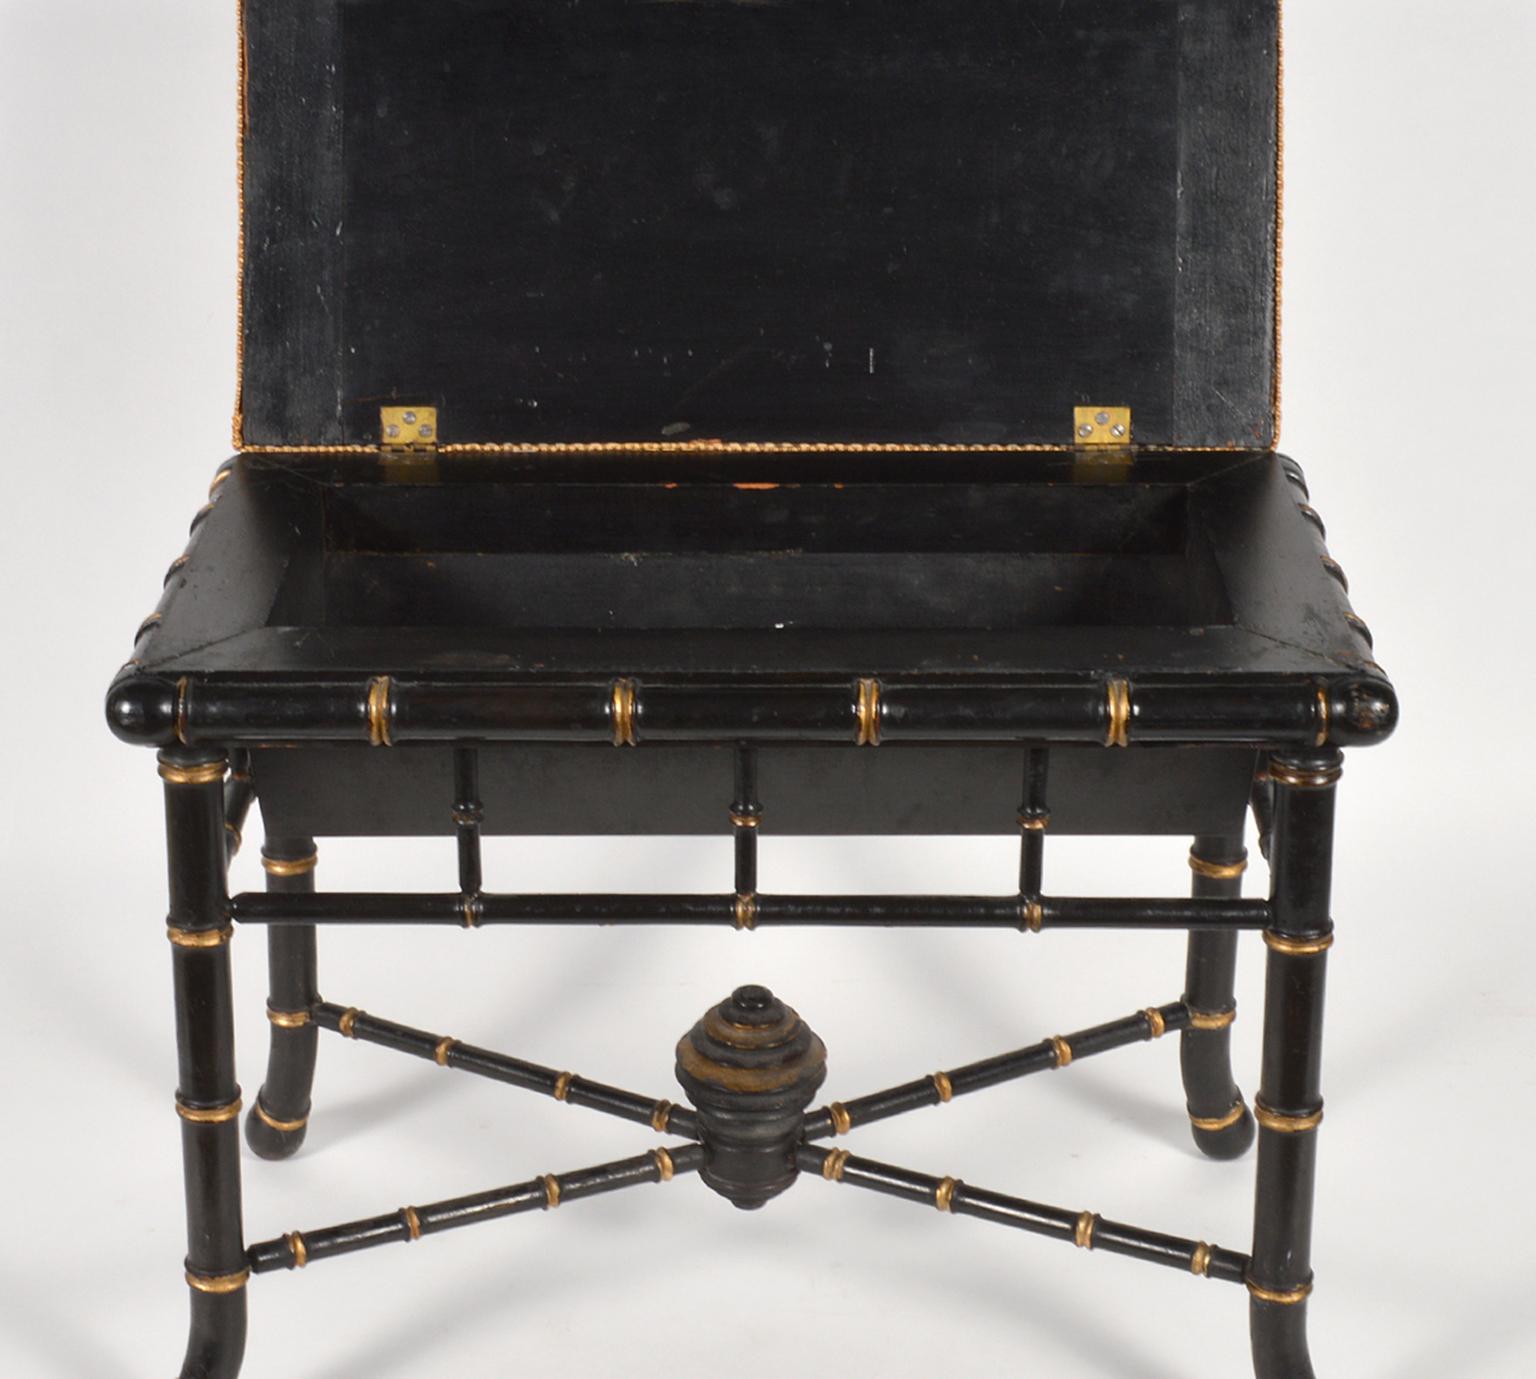 This elegant Regency style bench features an ebonized and gilt accented faux bamboo frame with four splayed legs united by a low x-stretcher centering a carved and turned ornament, 19th century. The upholstered seat opens up to an interior storage